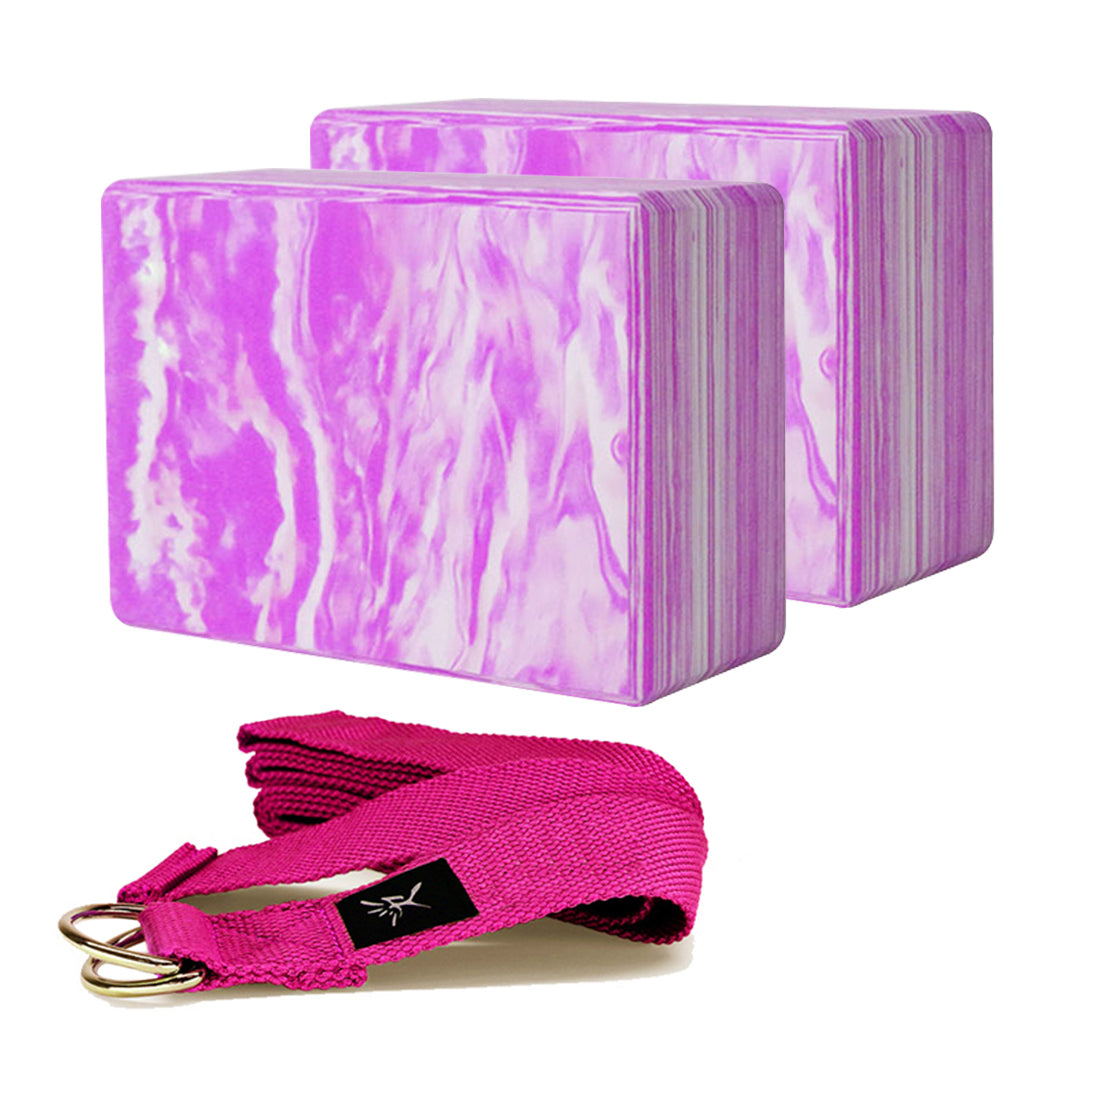 Anti Slip Patterned Yoga Block with Strap